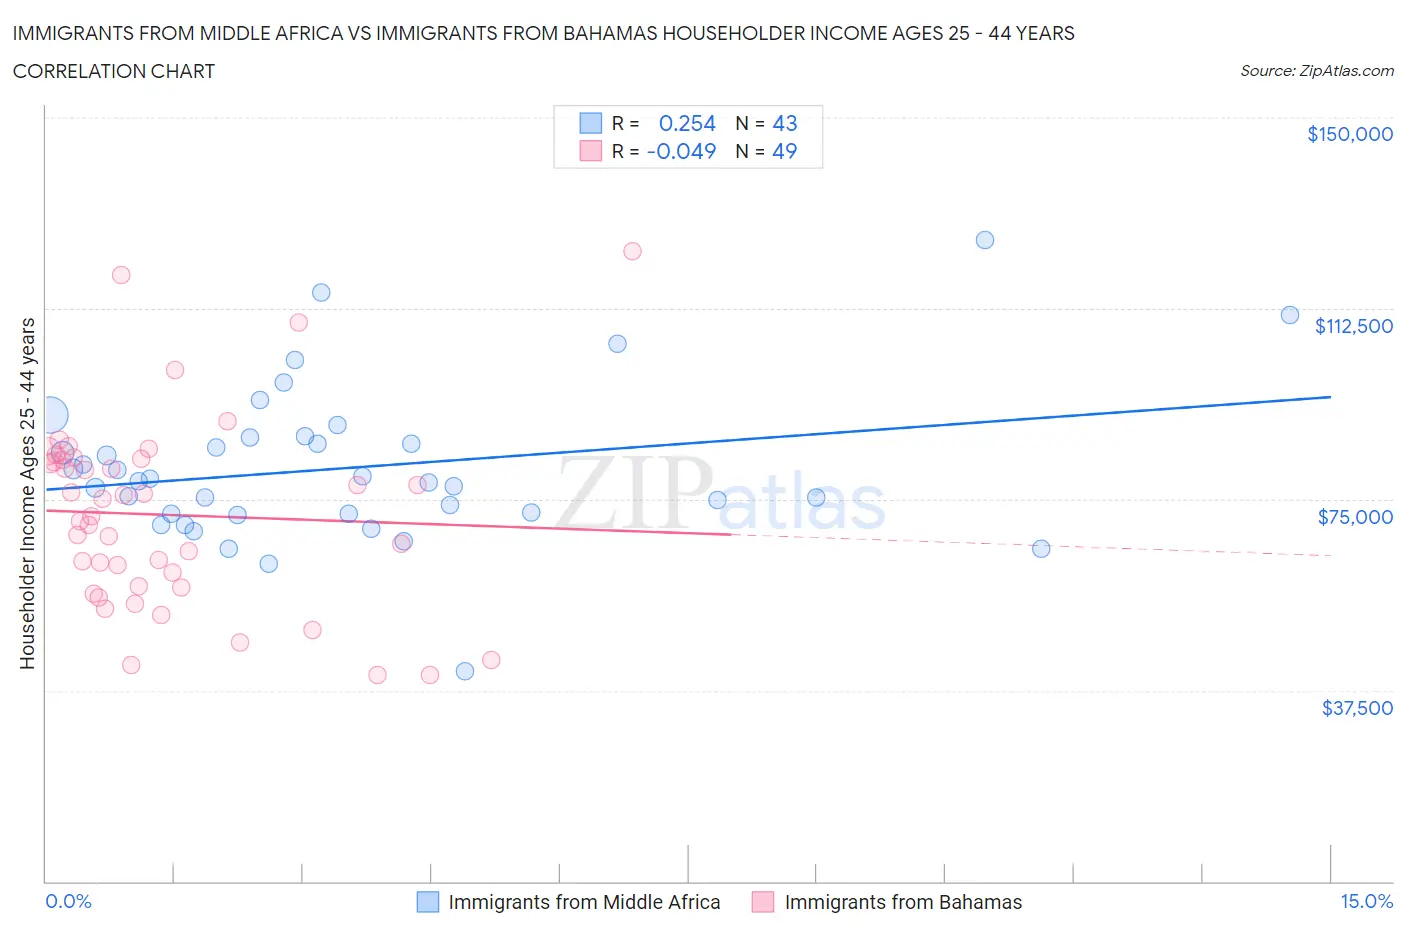 Immigrants from Middle Africa vs Immigrants from Bahamas Householder Income Ages 25 - 44 years